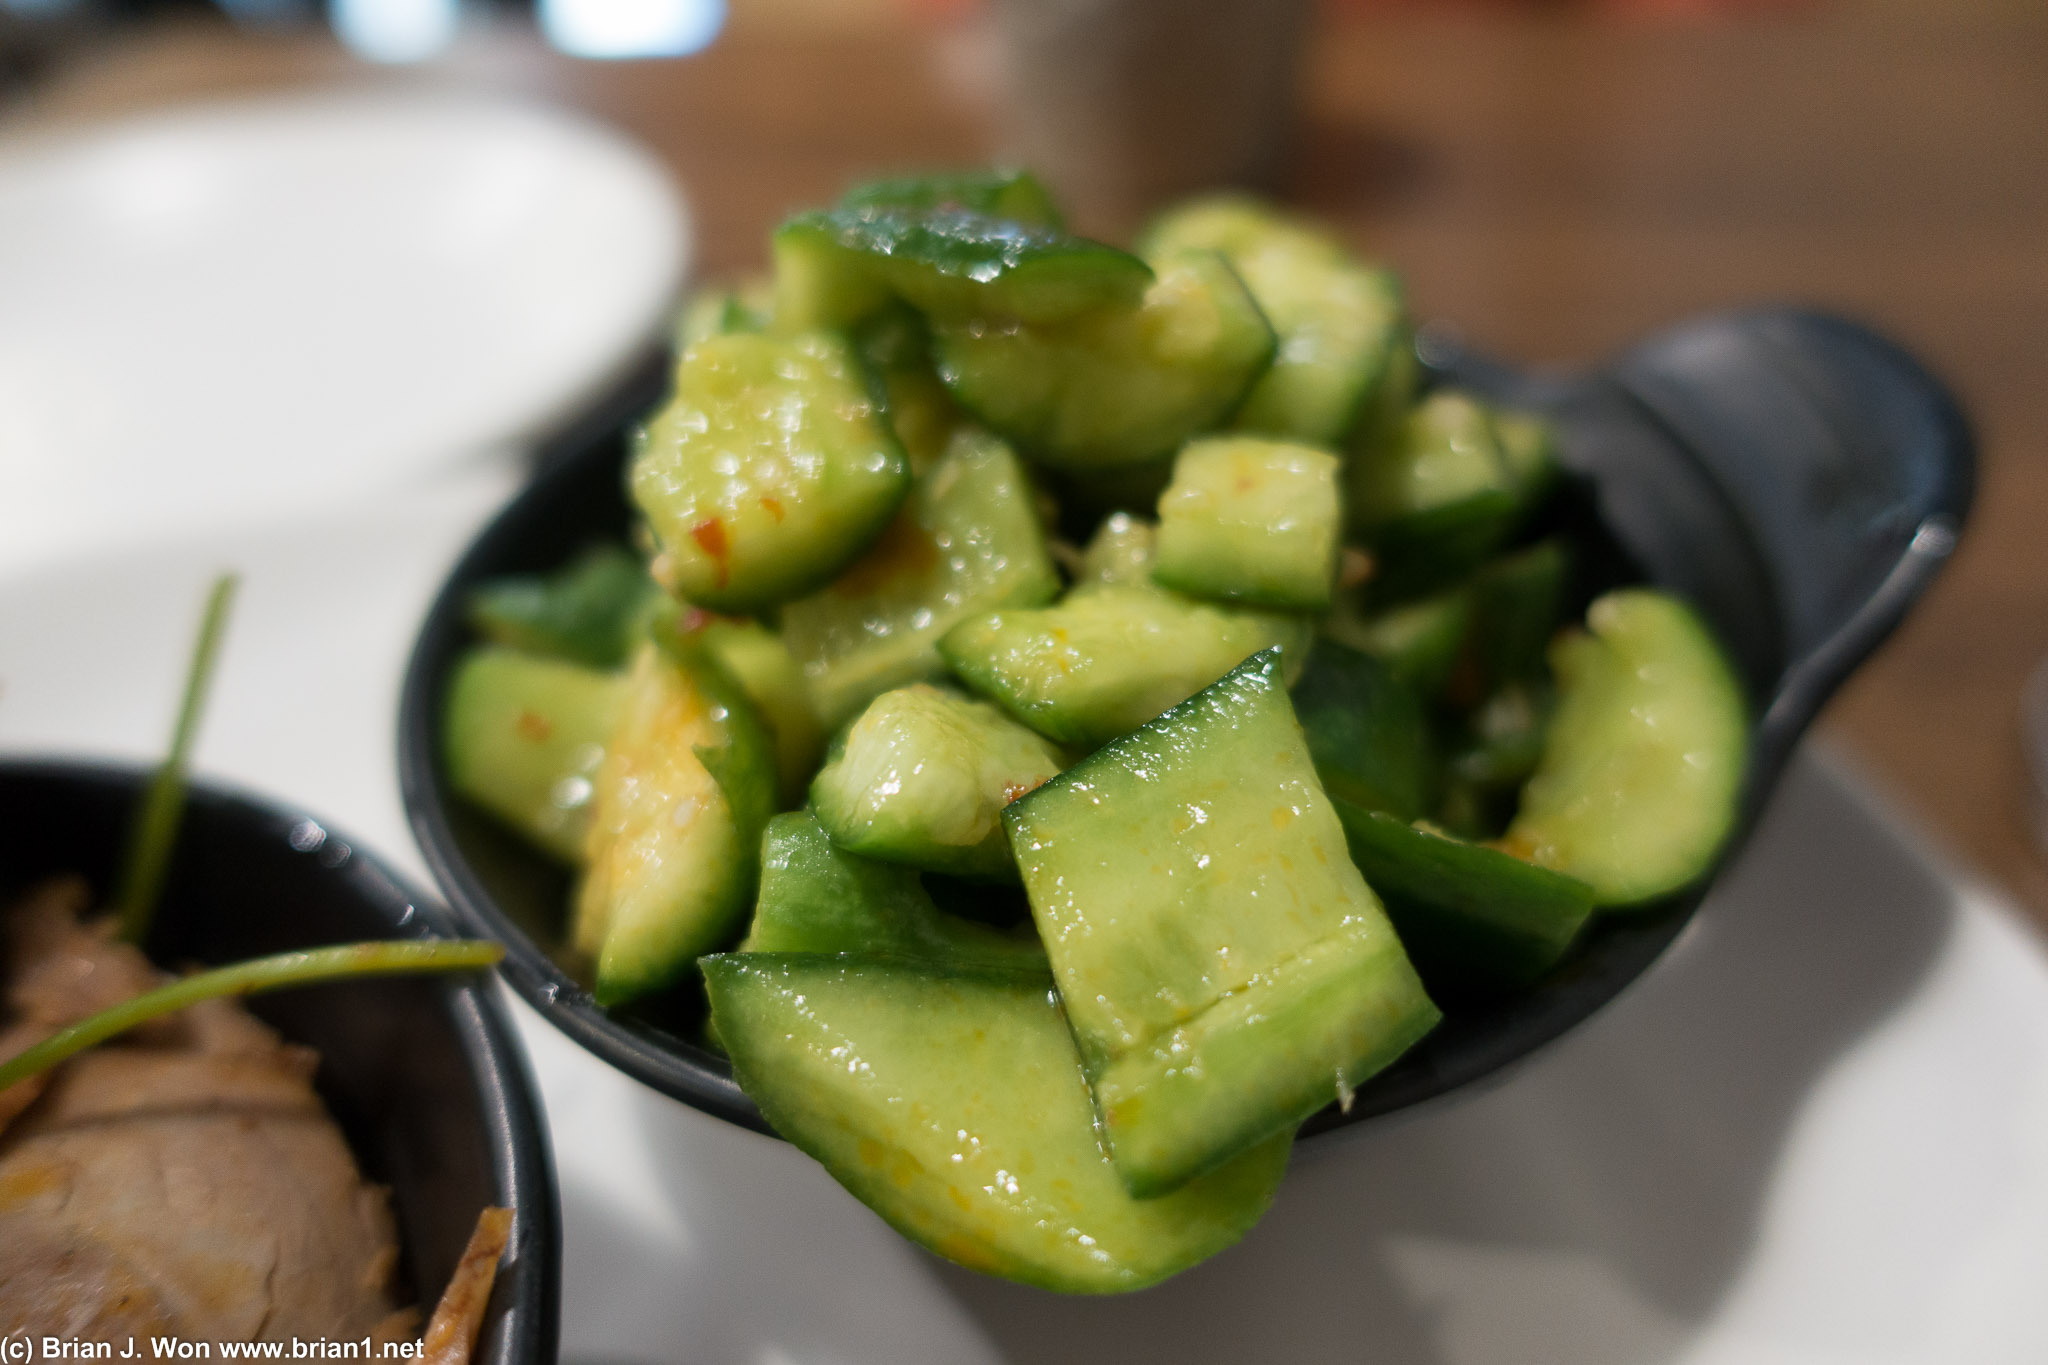 Cold cucumber. Could've used a little more crisp, or a little more spice, or both.